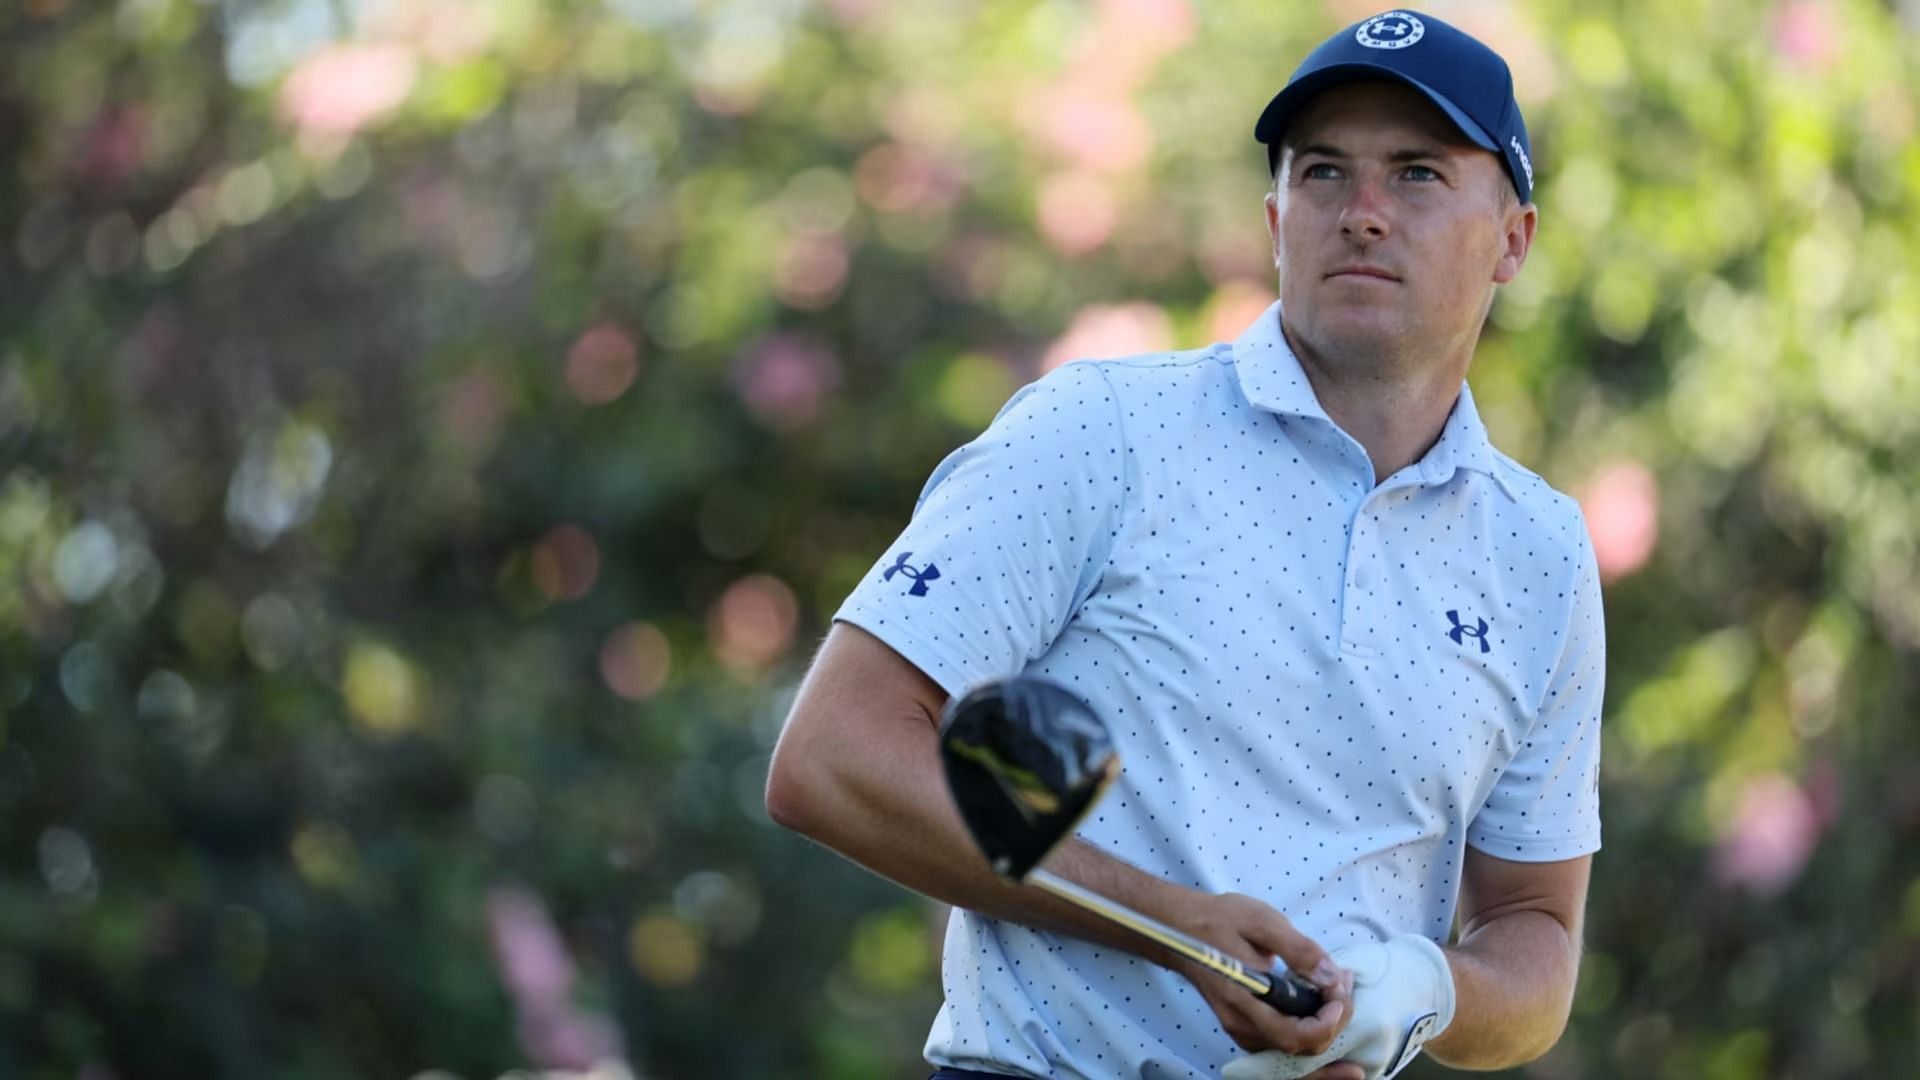 Jordan Spieth said it was just a bad decision to play the cliff shot last year